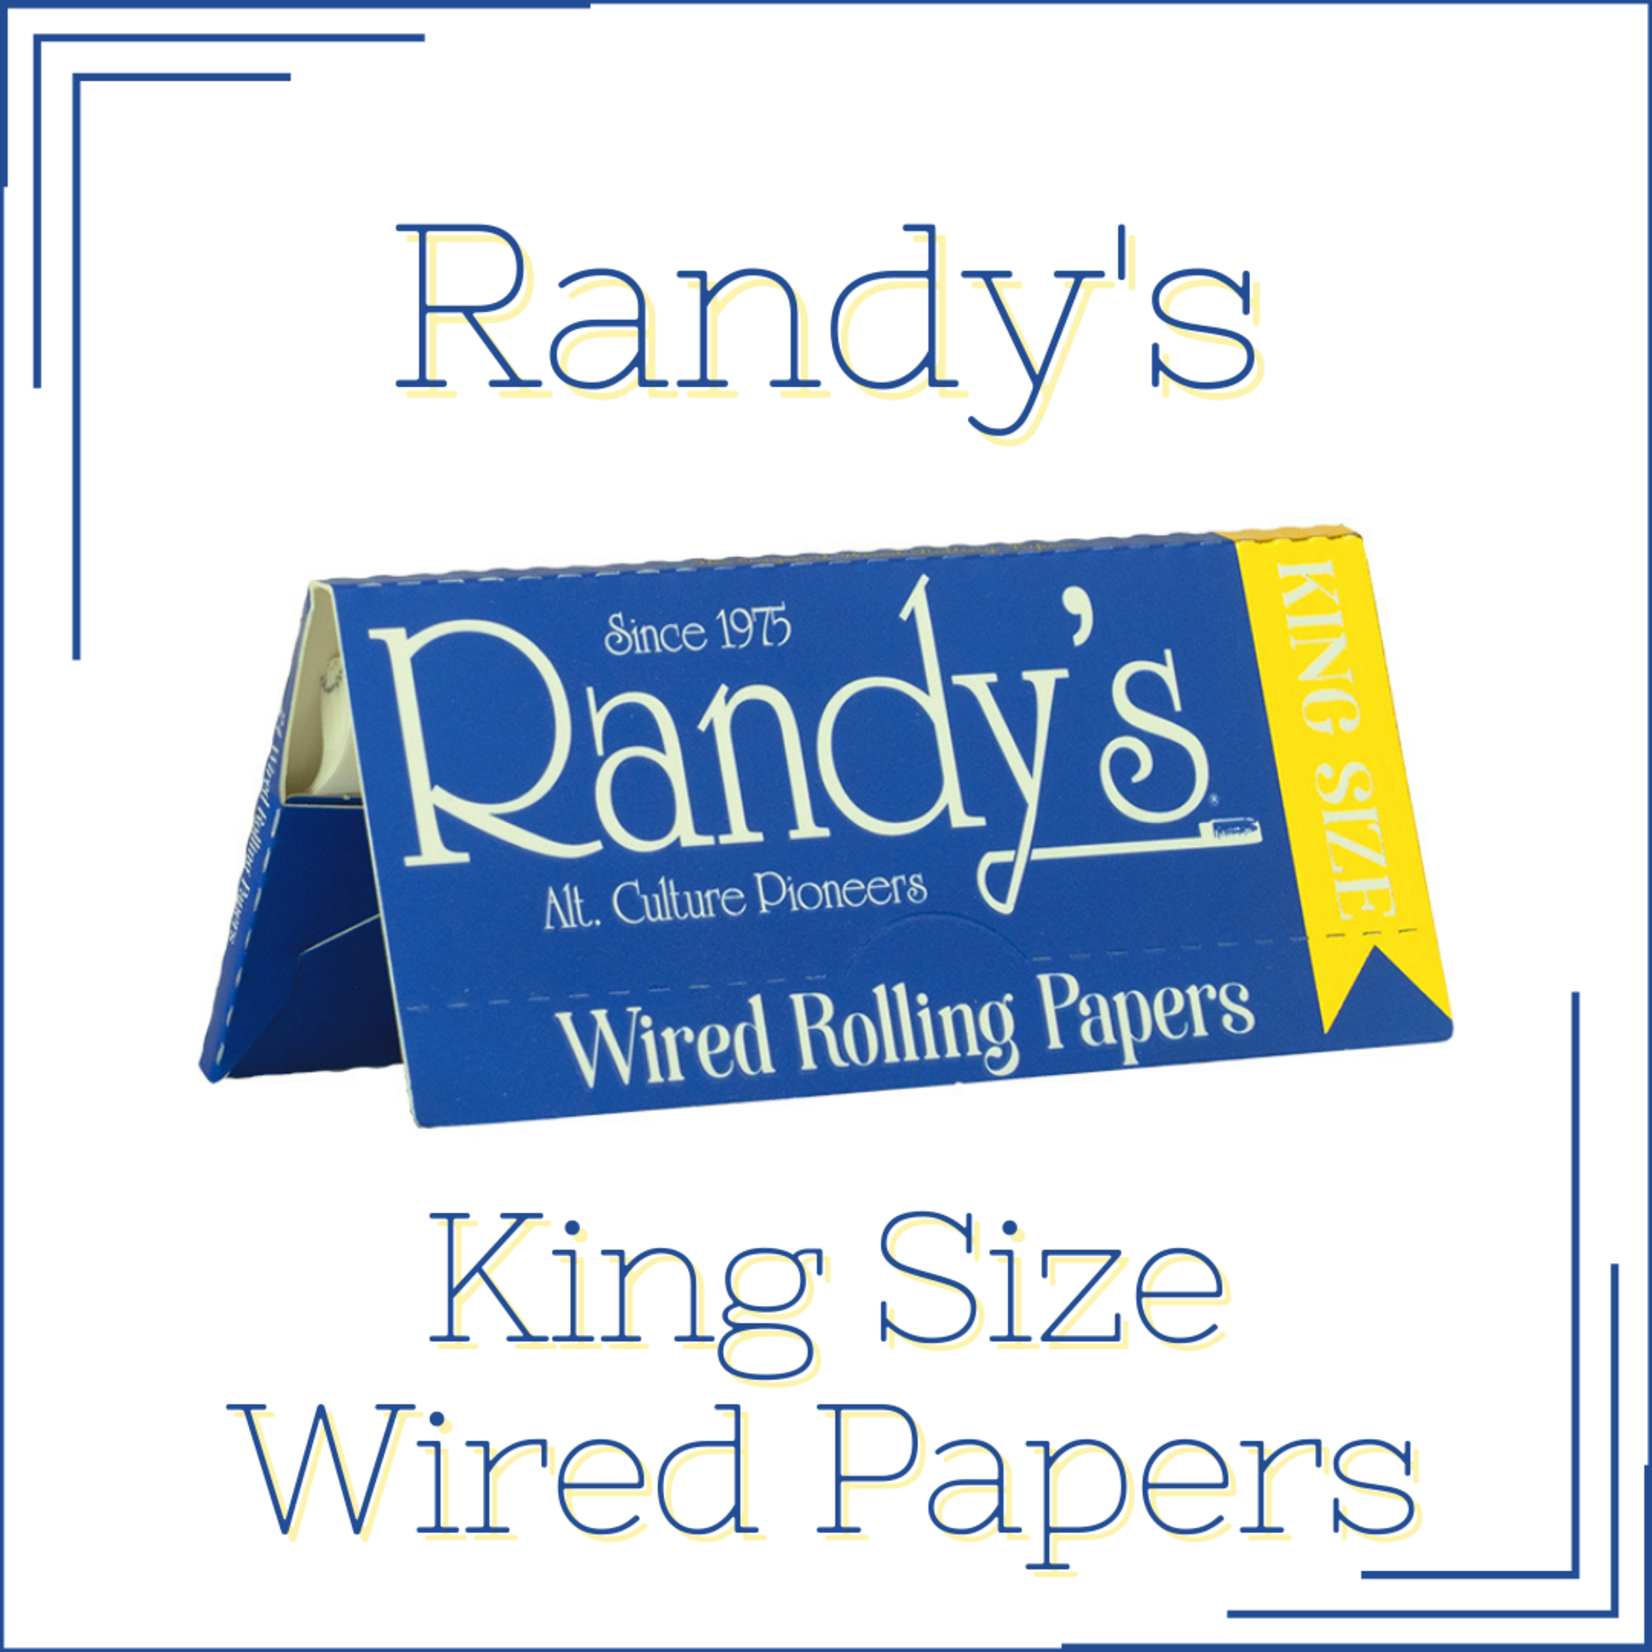 Randy's Randy's King-Size Wired Rolling Papers